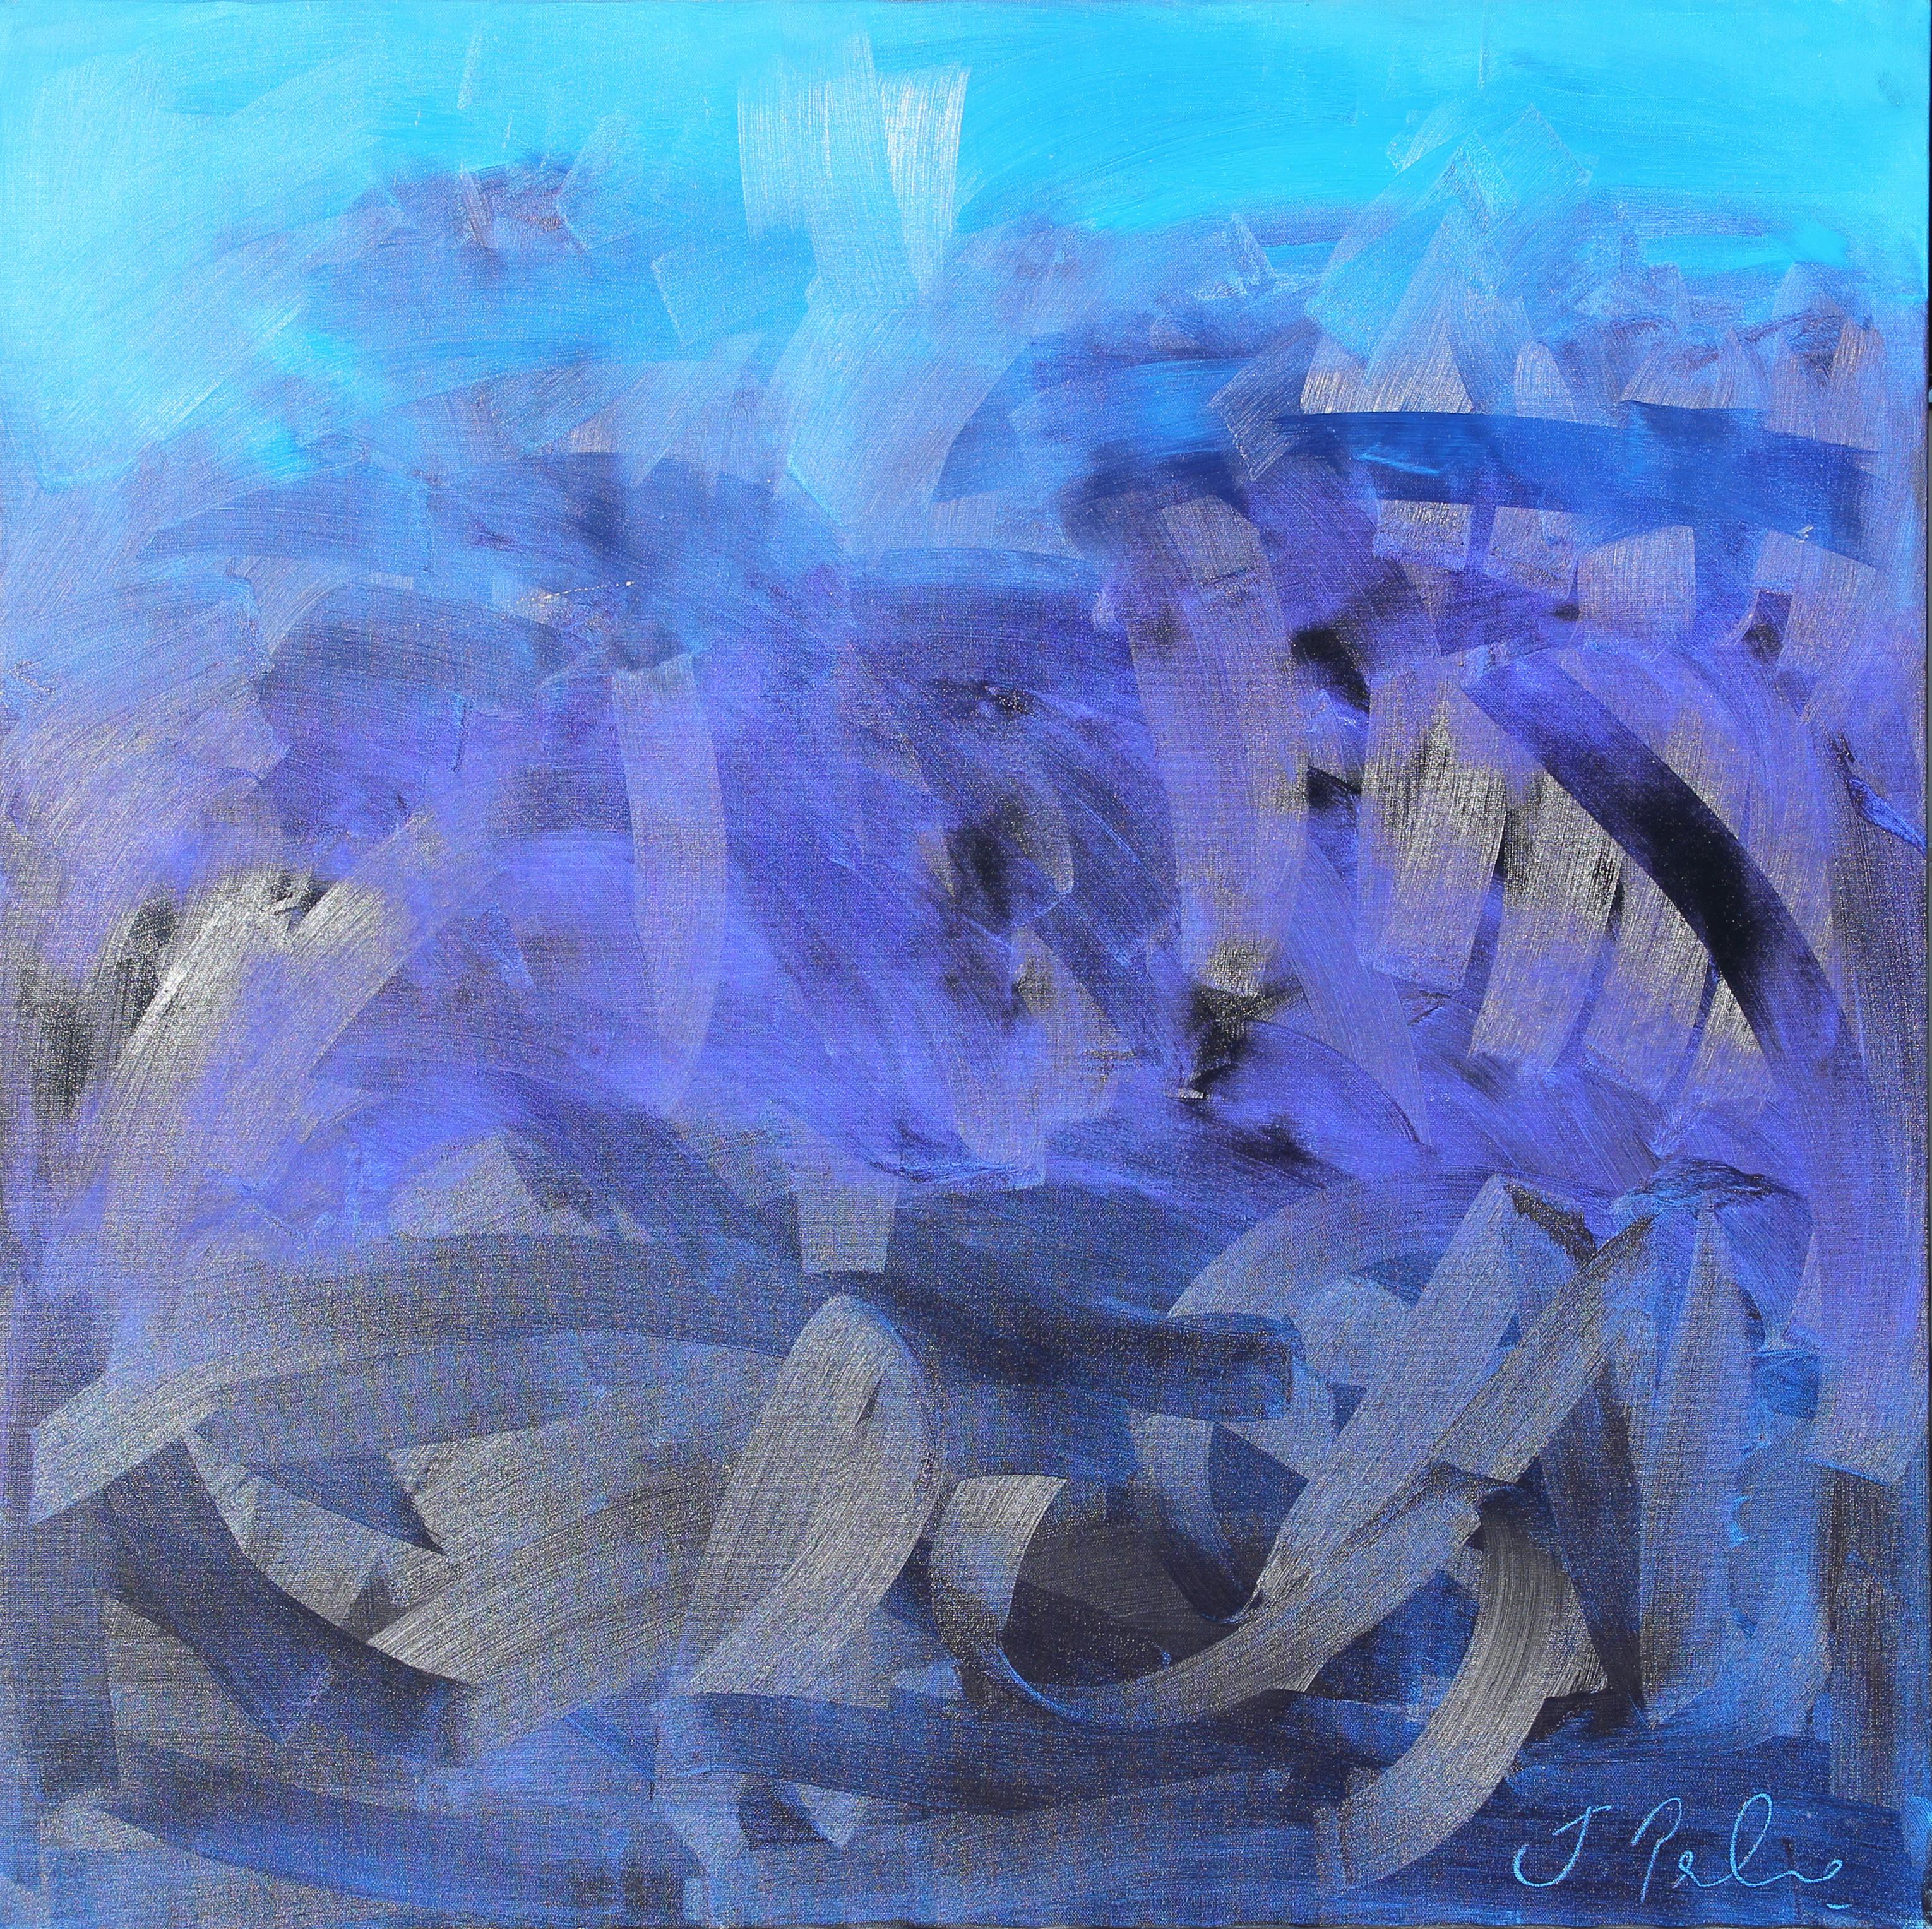 John Palmer Abstract Painting - Square Blue Toned Abstract Expressionist Painting